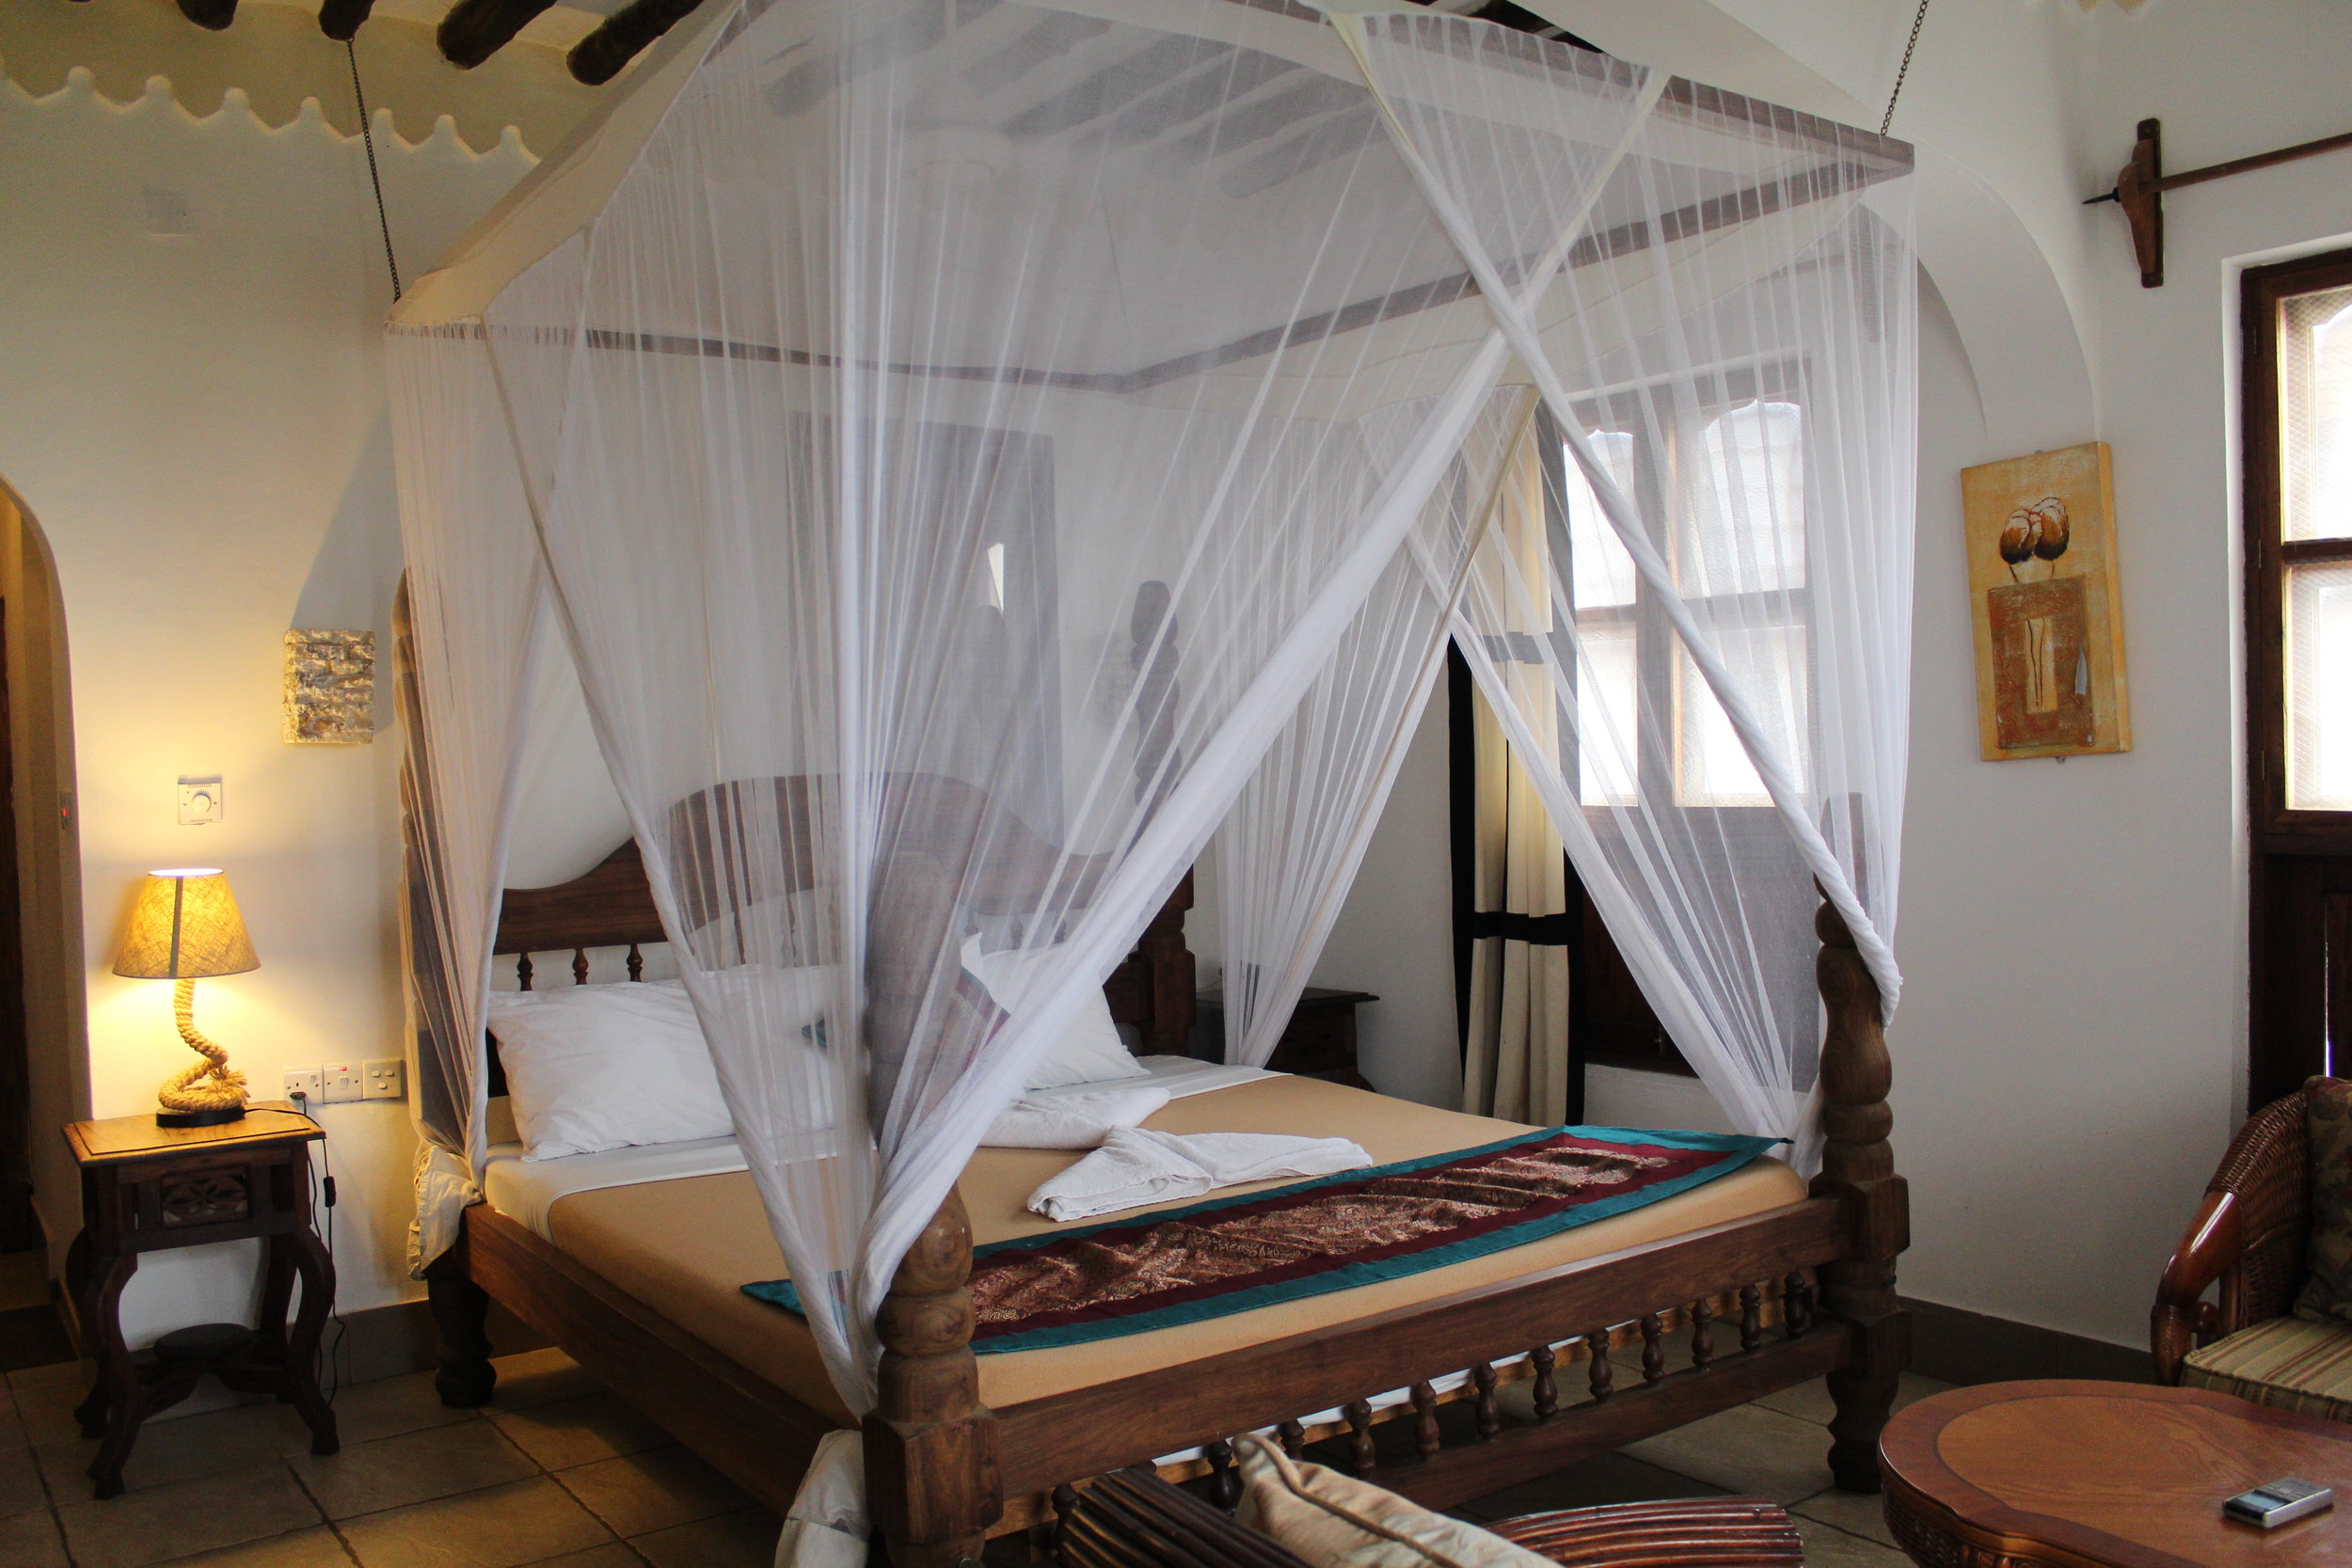 Our beautiful room and bed with mosquito netting at Langi Langi Beach Bungalows in Zanzibar